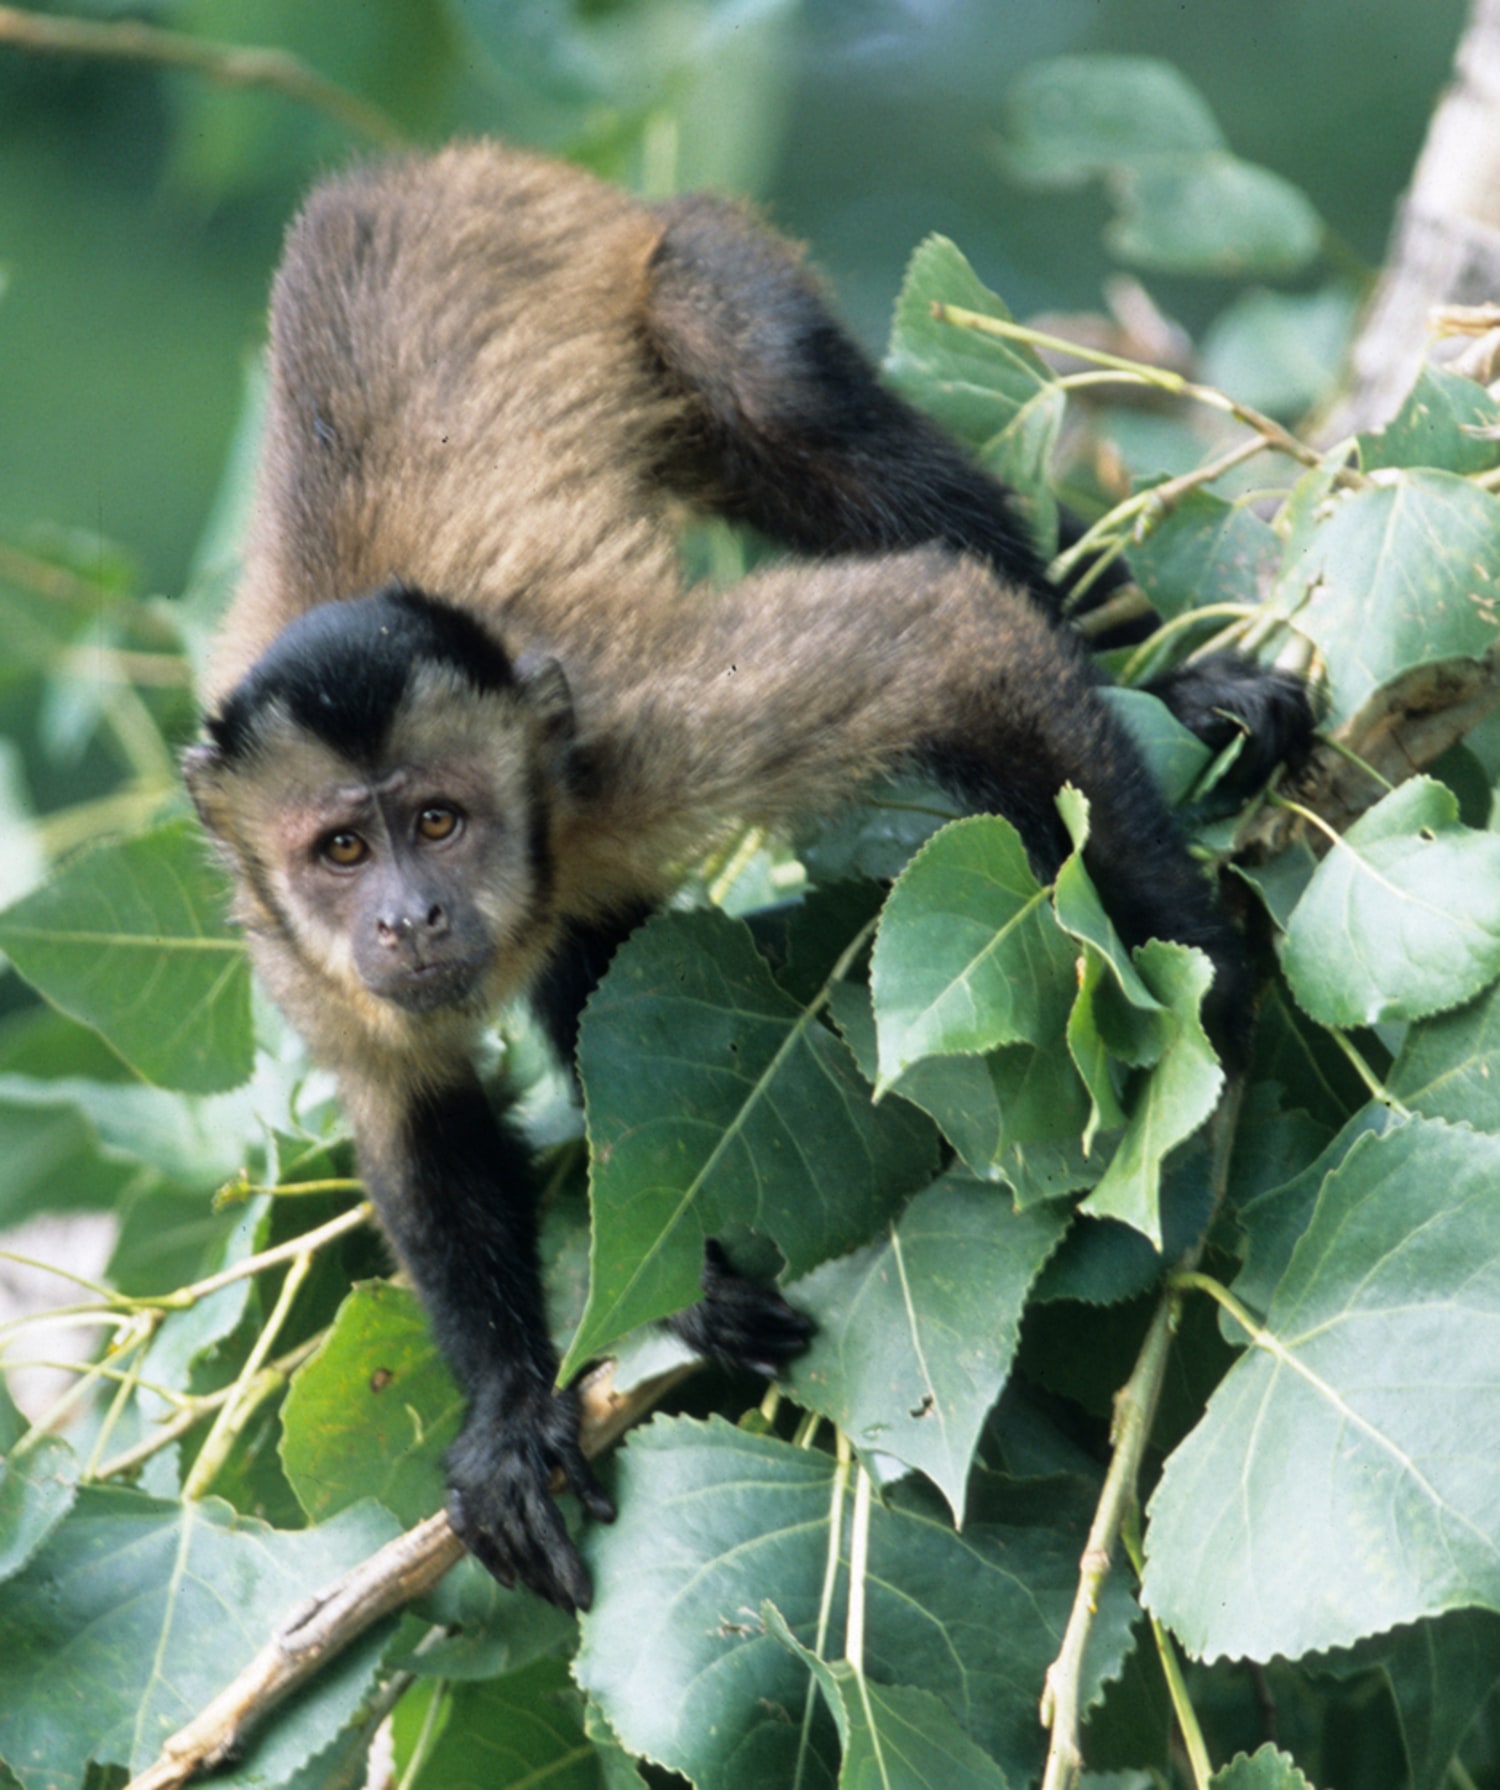 Monkeys in the City: The Urban Wildlife Syndrome and the